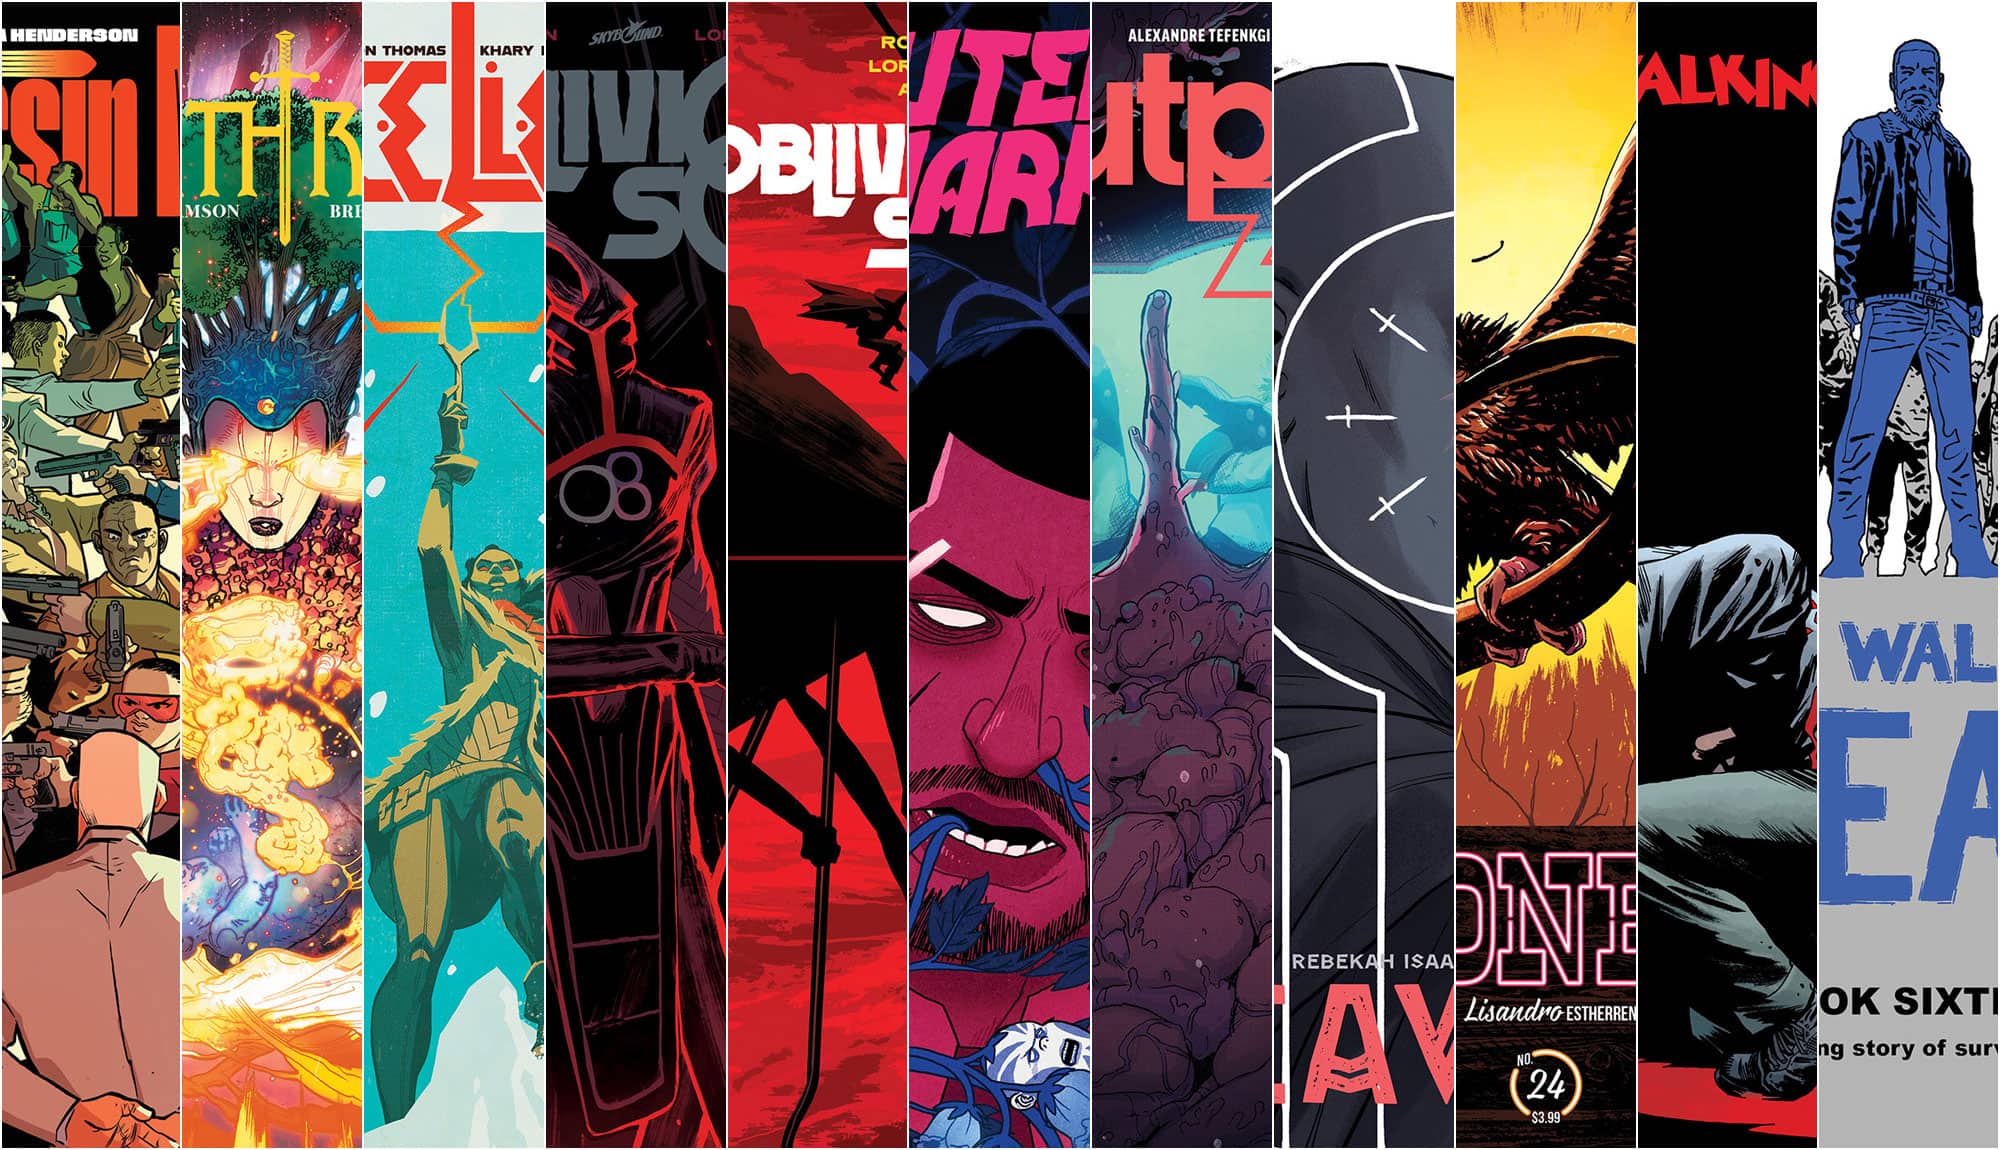 September 2019 Skybound Solicits! Books Announced!